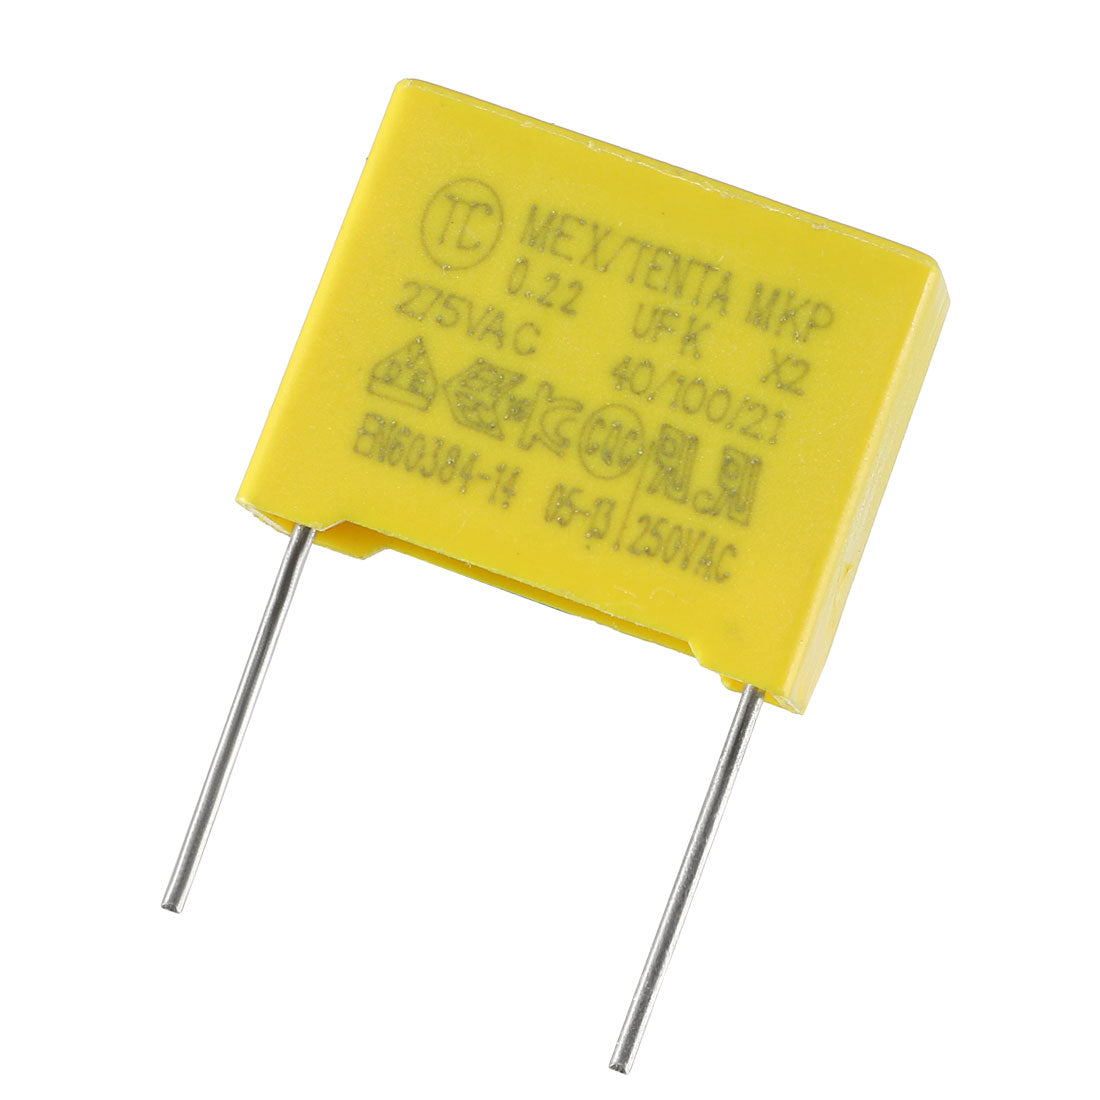 uxcell Uxcell Safety Capacitors Polypropylene Film 0.22uF 275VAC X2 MKP 10 Pcs